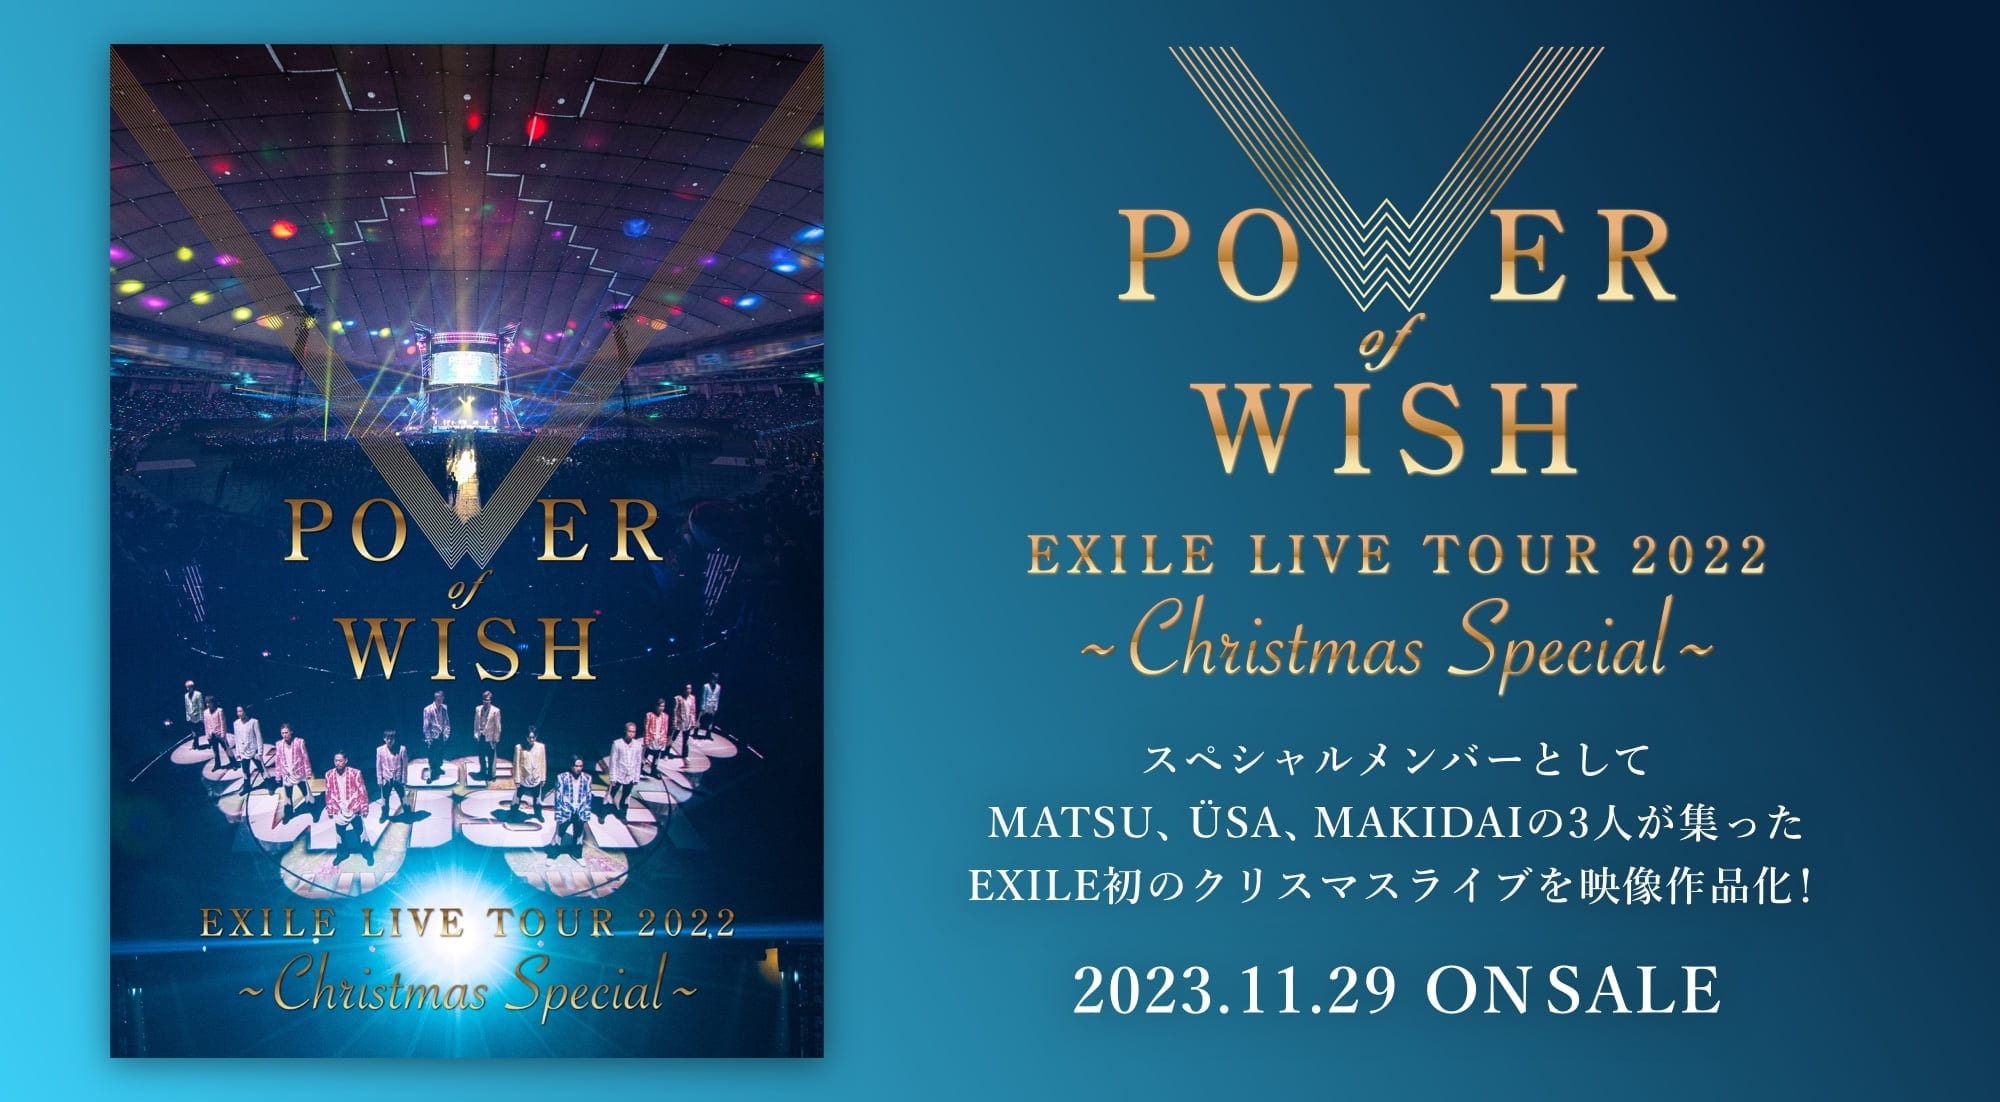 EXILE LIVE TOUR 2022  POWER OF WISH  DVD